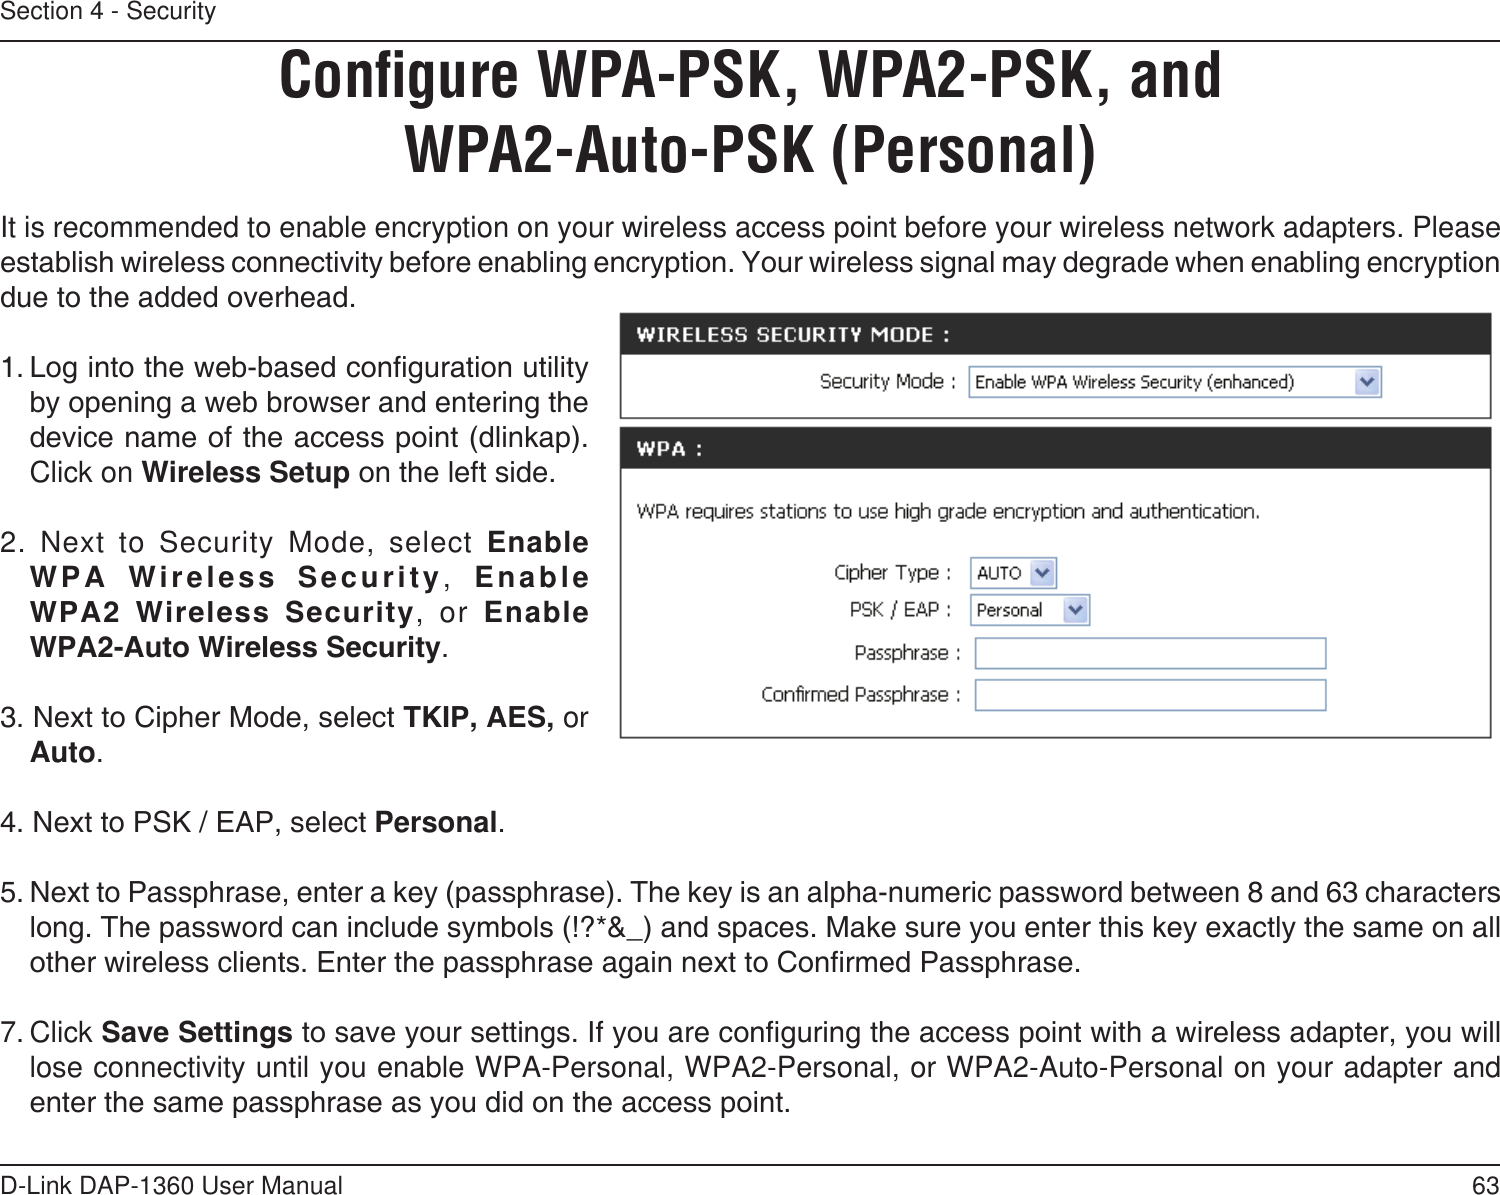 63D-Link DAP-1360 User ManualSection 4 - SecurityConﬁgure WPA-PSK, WPA2-PSK, and WPA2-Auto-PSK (Personal)It is recommended to enable encryption on your wireless access point before your wireless network adapters. Please establish wireless connectivity before enabling encryption. Your wireless signal may degrade when enabling encryption due to the added overhead.1. Log into the web-based conguration utility by opening a web browser and entering the device name of the access point (dlinkap).  Click on Wireless Setup on the left side.2. Next to Security Mode, select Enable WPA  Wireless  Security,  Enable  WPA2  Wireless  Security, or Enable  WPA2-Auto Wireless Security.3. Next to Cipher Mode, select TKIP, AES, or Auto.4. Next to PSK / EAP, select Personal.5. Next to Passphrase, enter a key (passphrase). The key is an alpha-numeric password between 8 and 63 characters long. The password can include symbols (!?*&amp;_) and spaces. Make sure you enter this key exactly the same on all other wireless clients. Enter the passphrase again next to Conrmed Passphrase.7. Click Save Settings to save your settings. If you are conguring the access point with a wireless adapter, you will lose connectivity until you enable WPA-Personal, WPA2-Personal, or WPA2-Auto-Personal on your adapter and enter the same passphrase as you did on the access point.